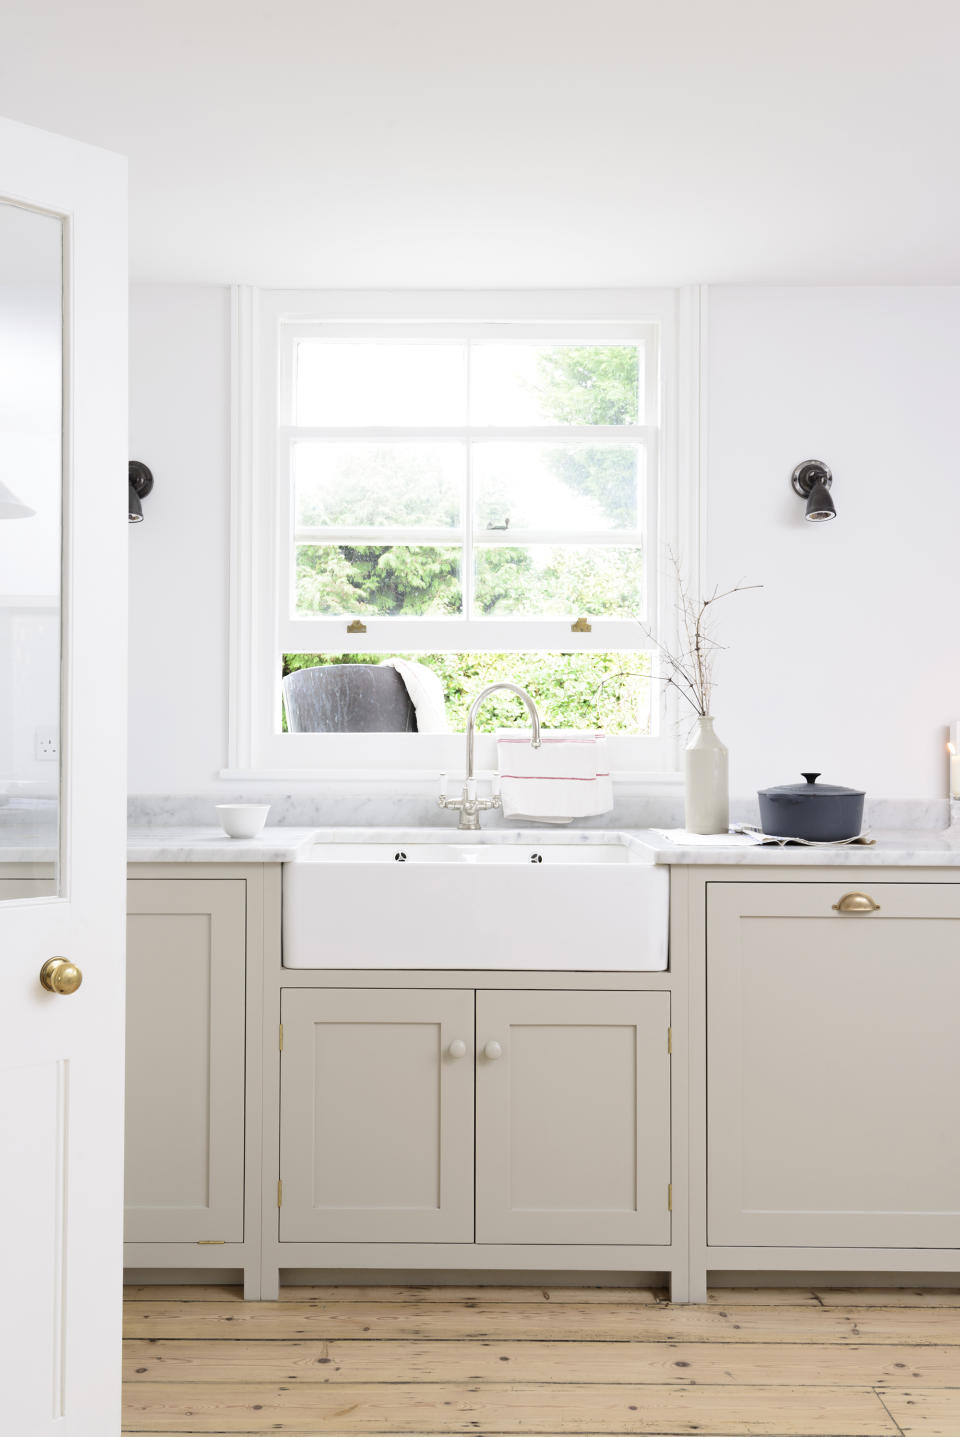 2. Use beige for a timeless kitchen